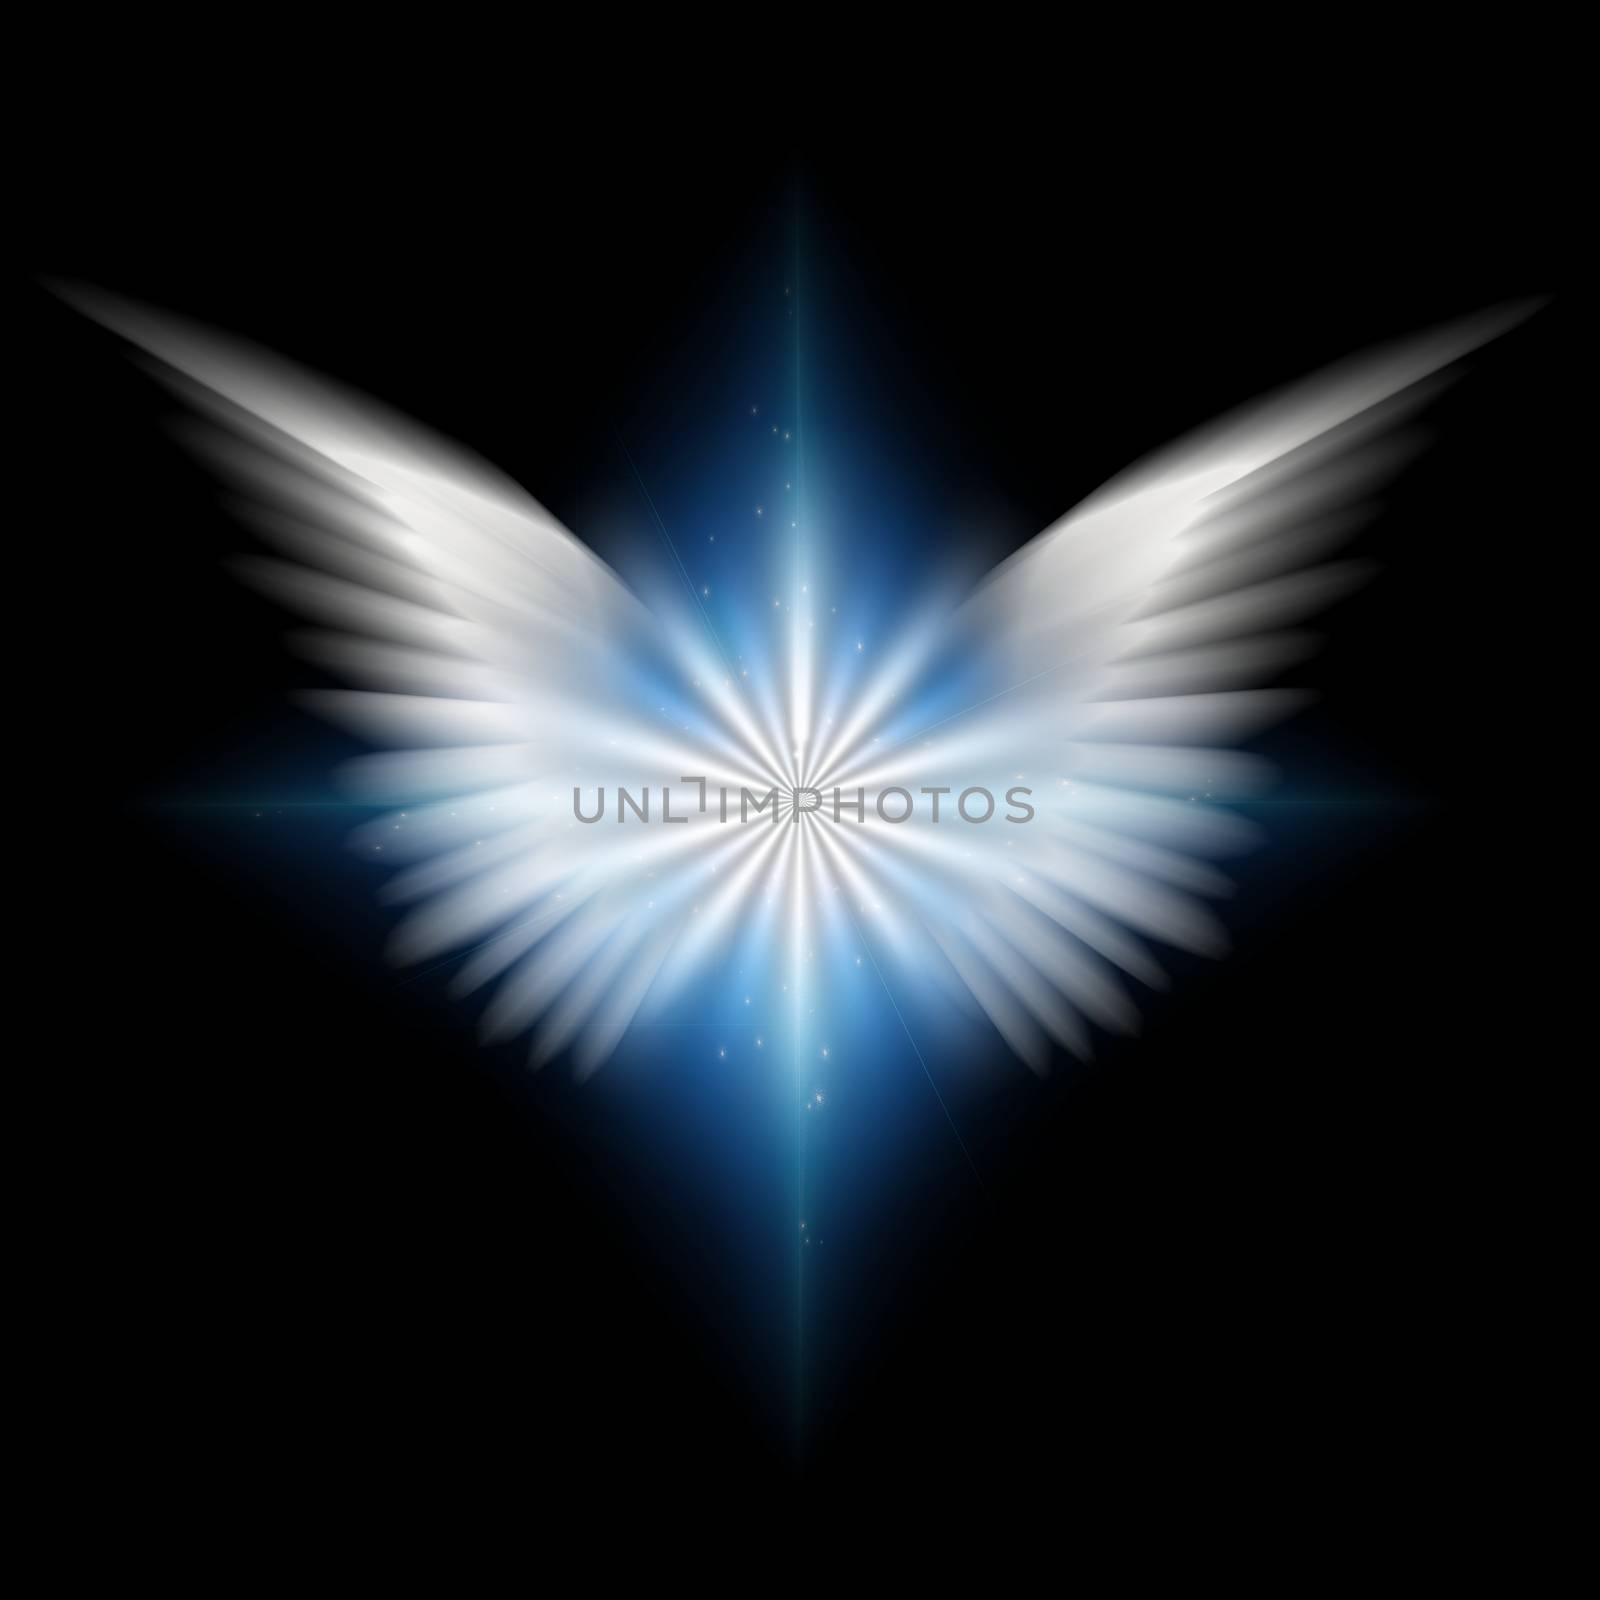 Surreal digital art. Bright star with white angel's wings. 3D rendering